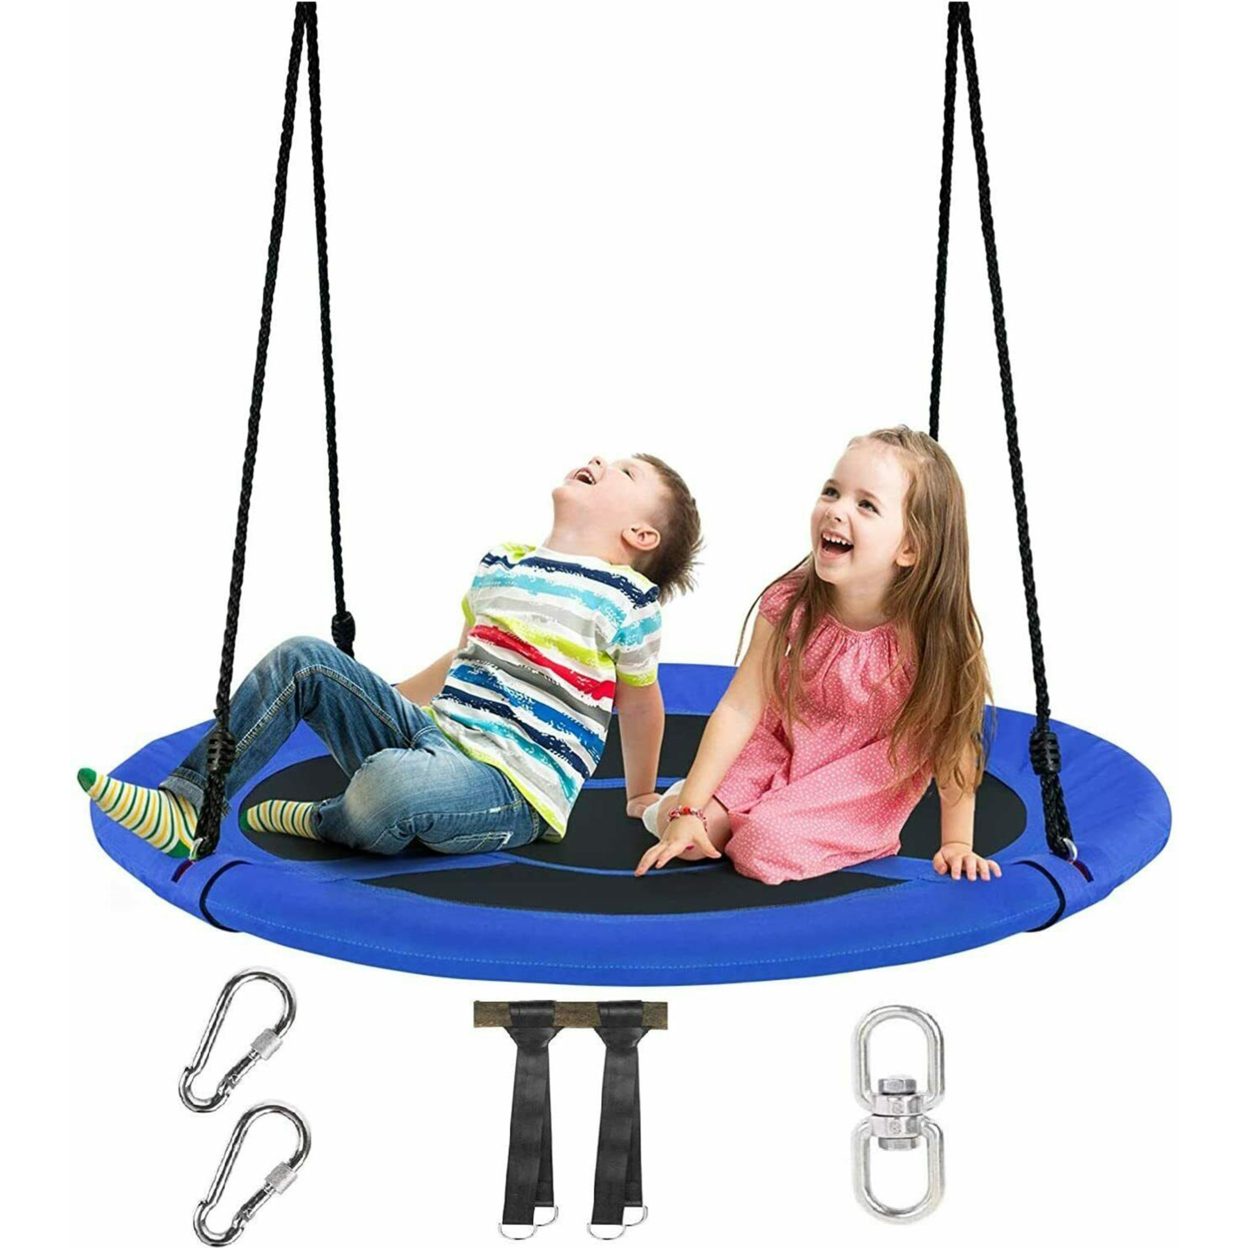 Gymax 40'' 770 Lbs Flying Saucer Tree Swing Kids Gift W/ 2 Tree Hanging Straps - Multi-color